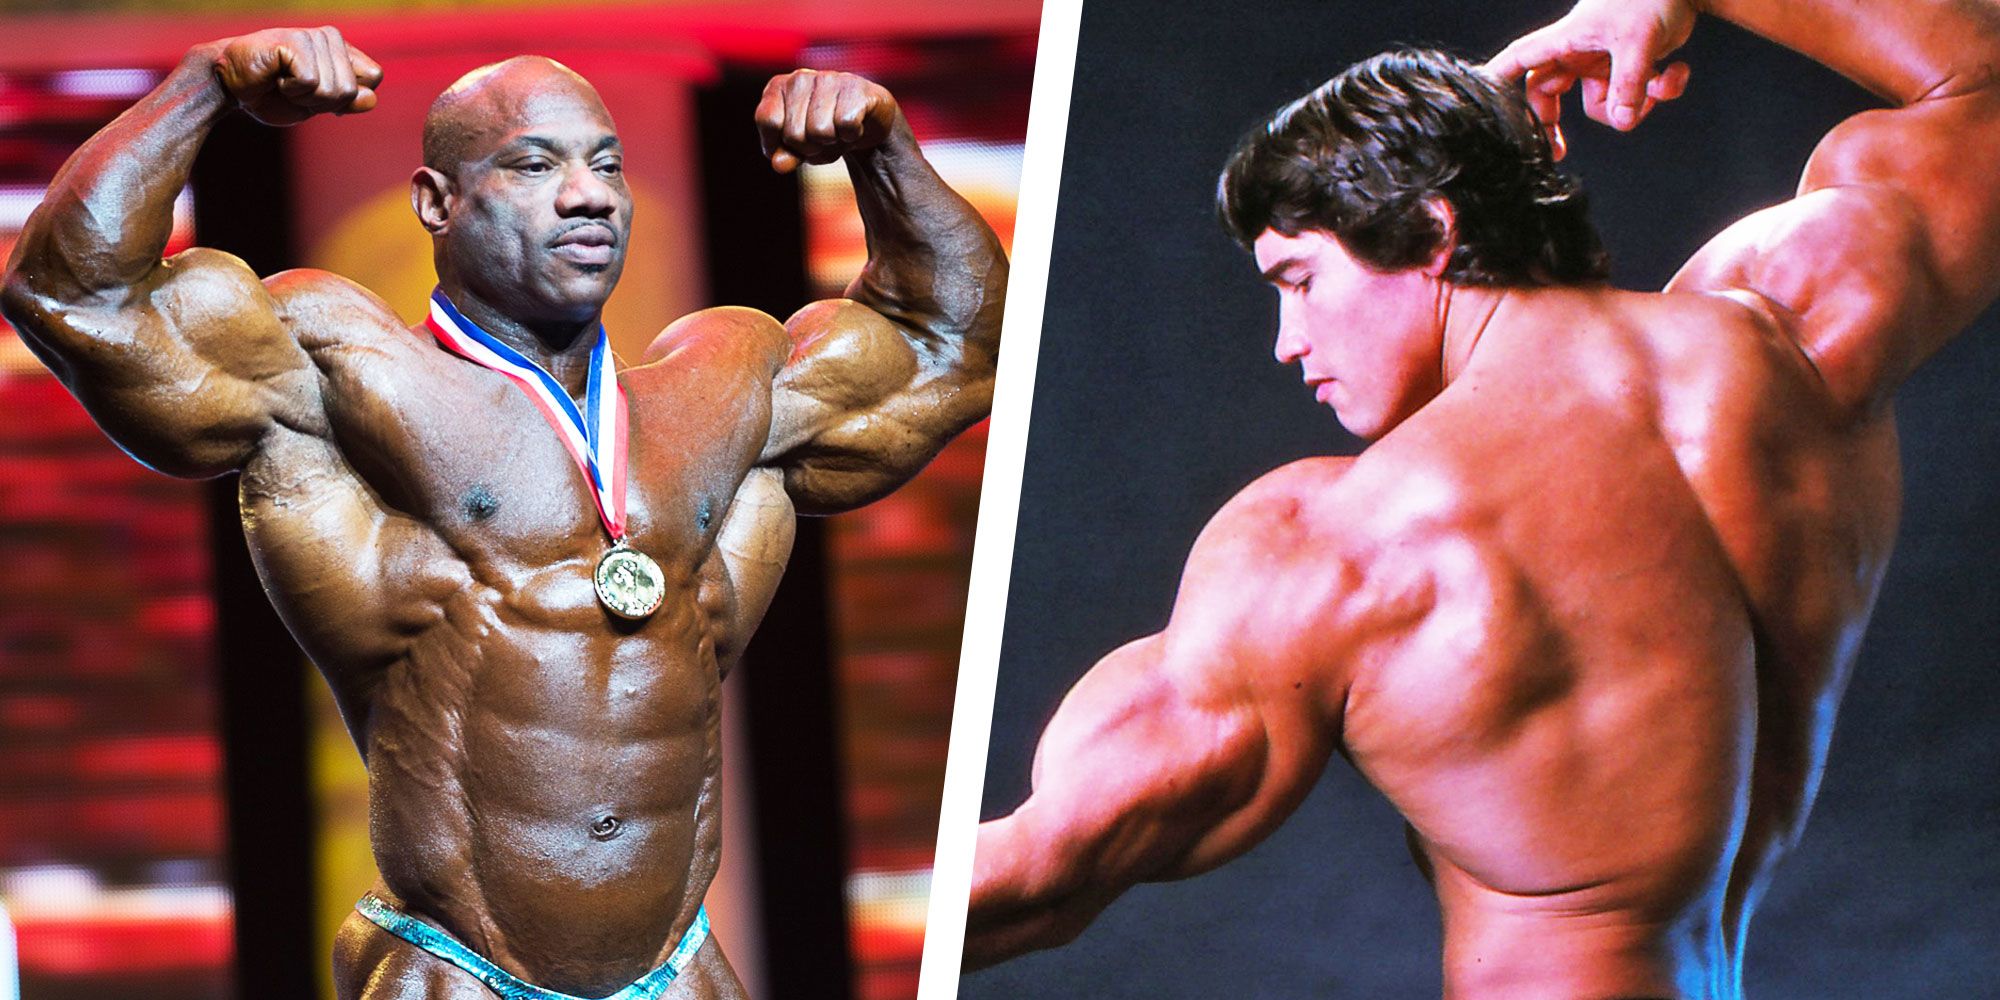 SFBF Guest Poser Ronnie Coleman - Dailymotion Video